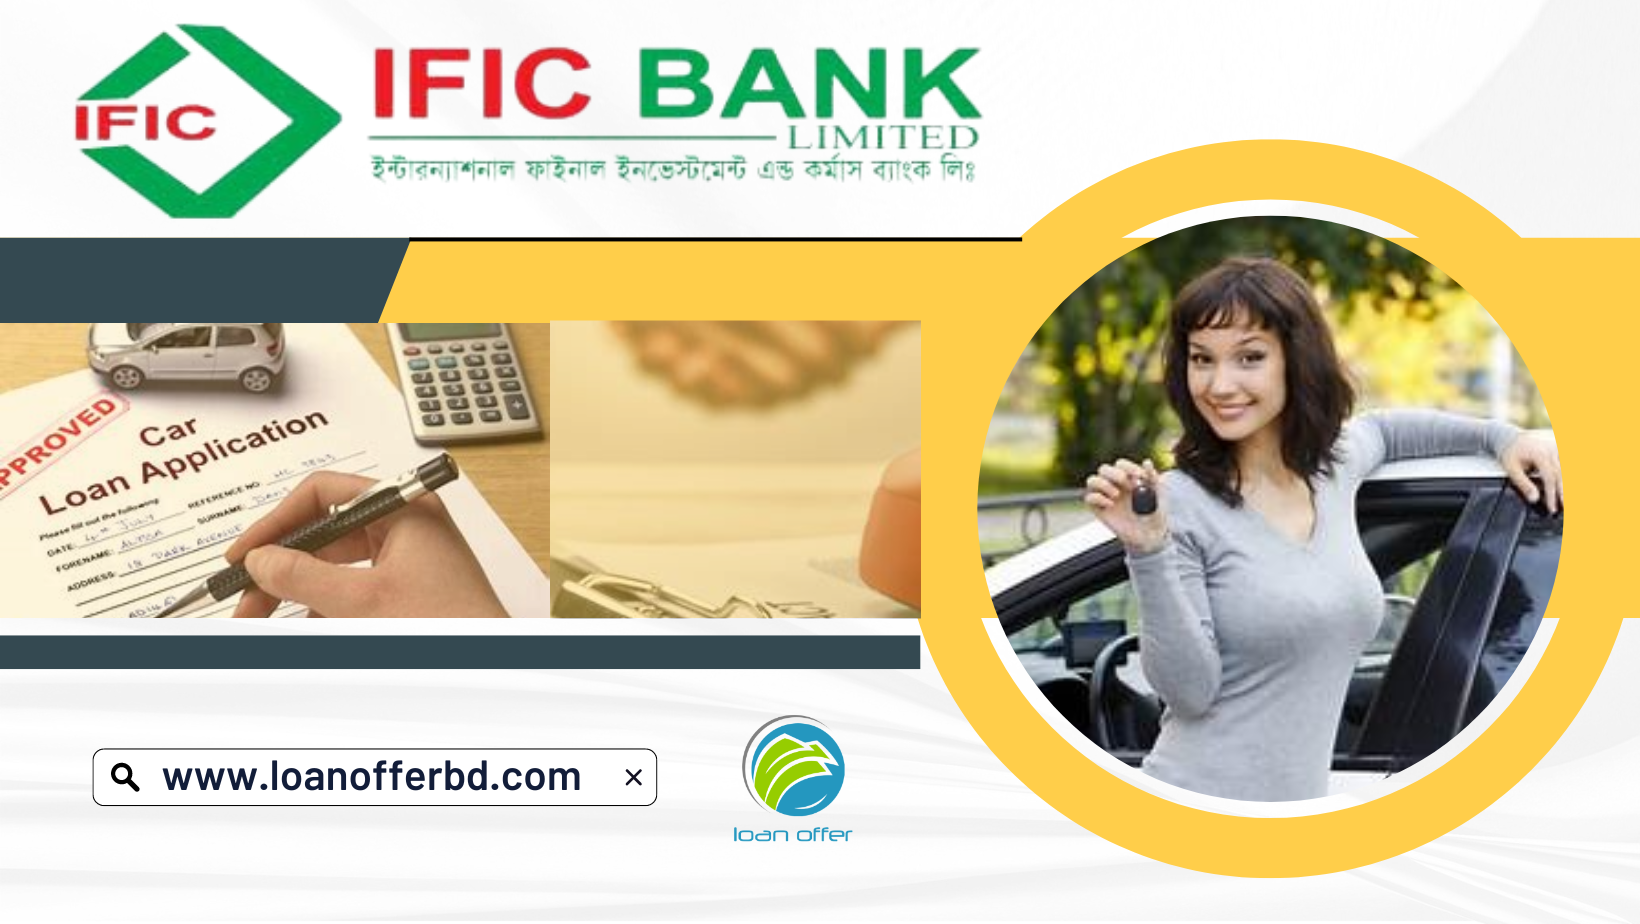 ific-auto-loan-mortgage-backed-loanofferbd